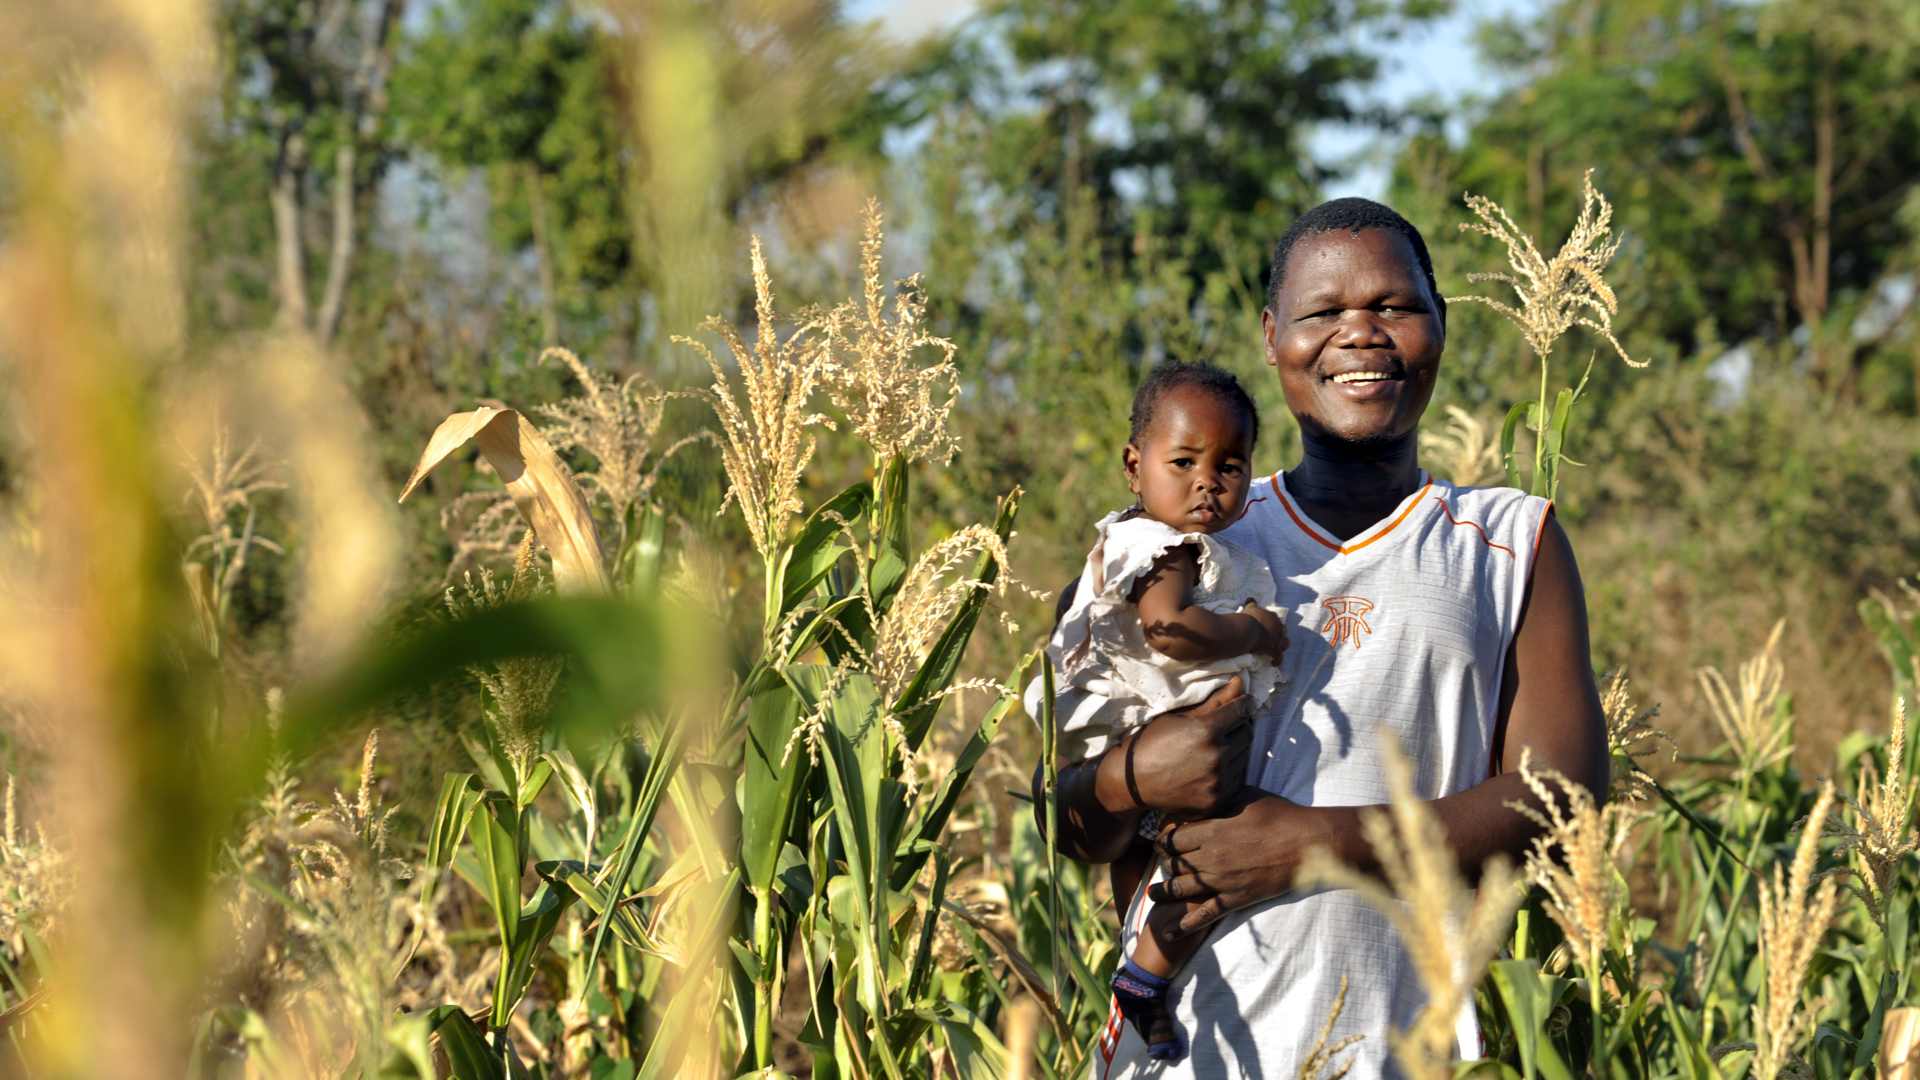 Joseph and his daughter in Malawi smiling at the camera